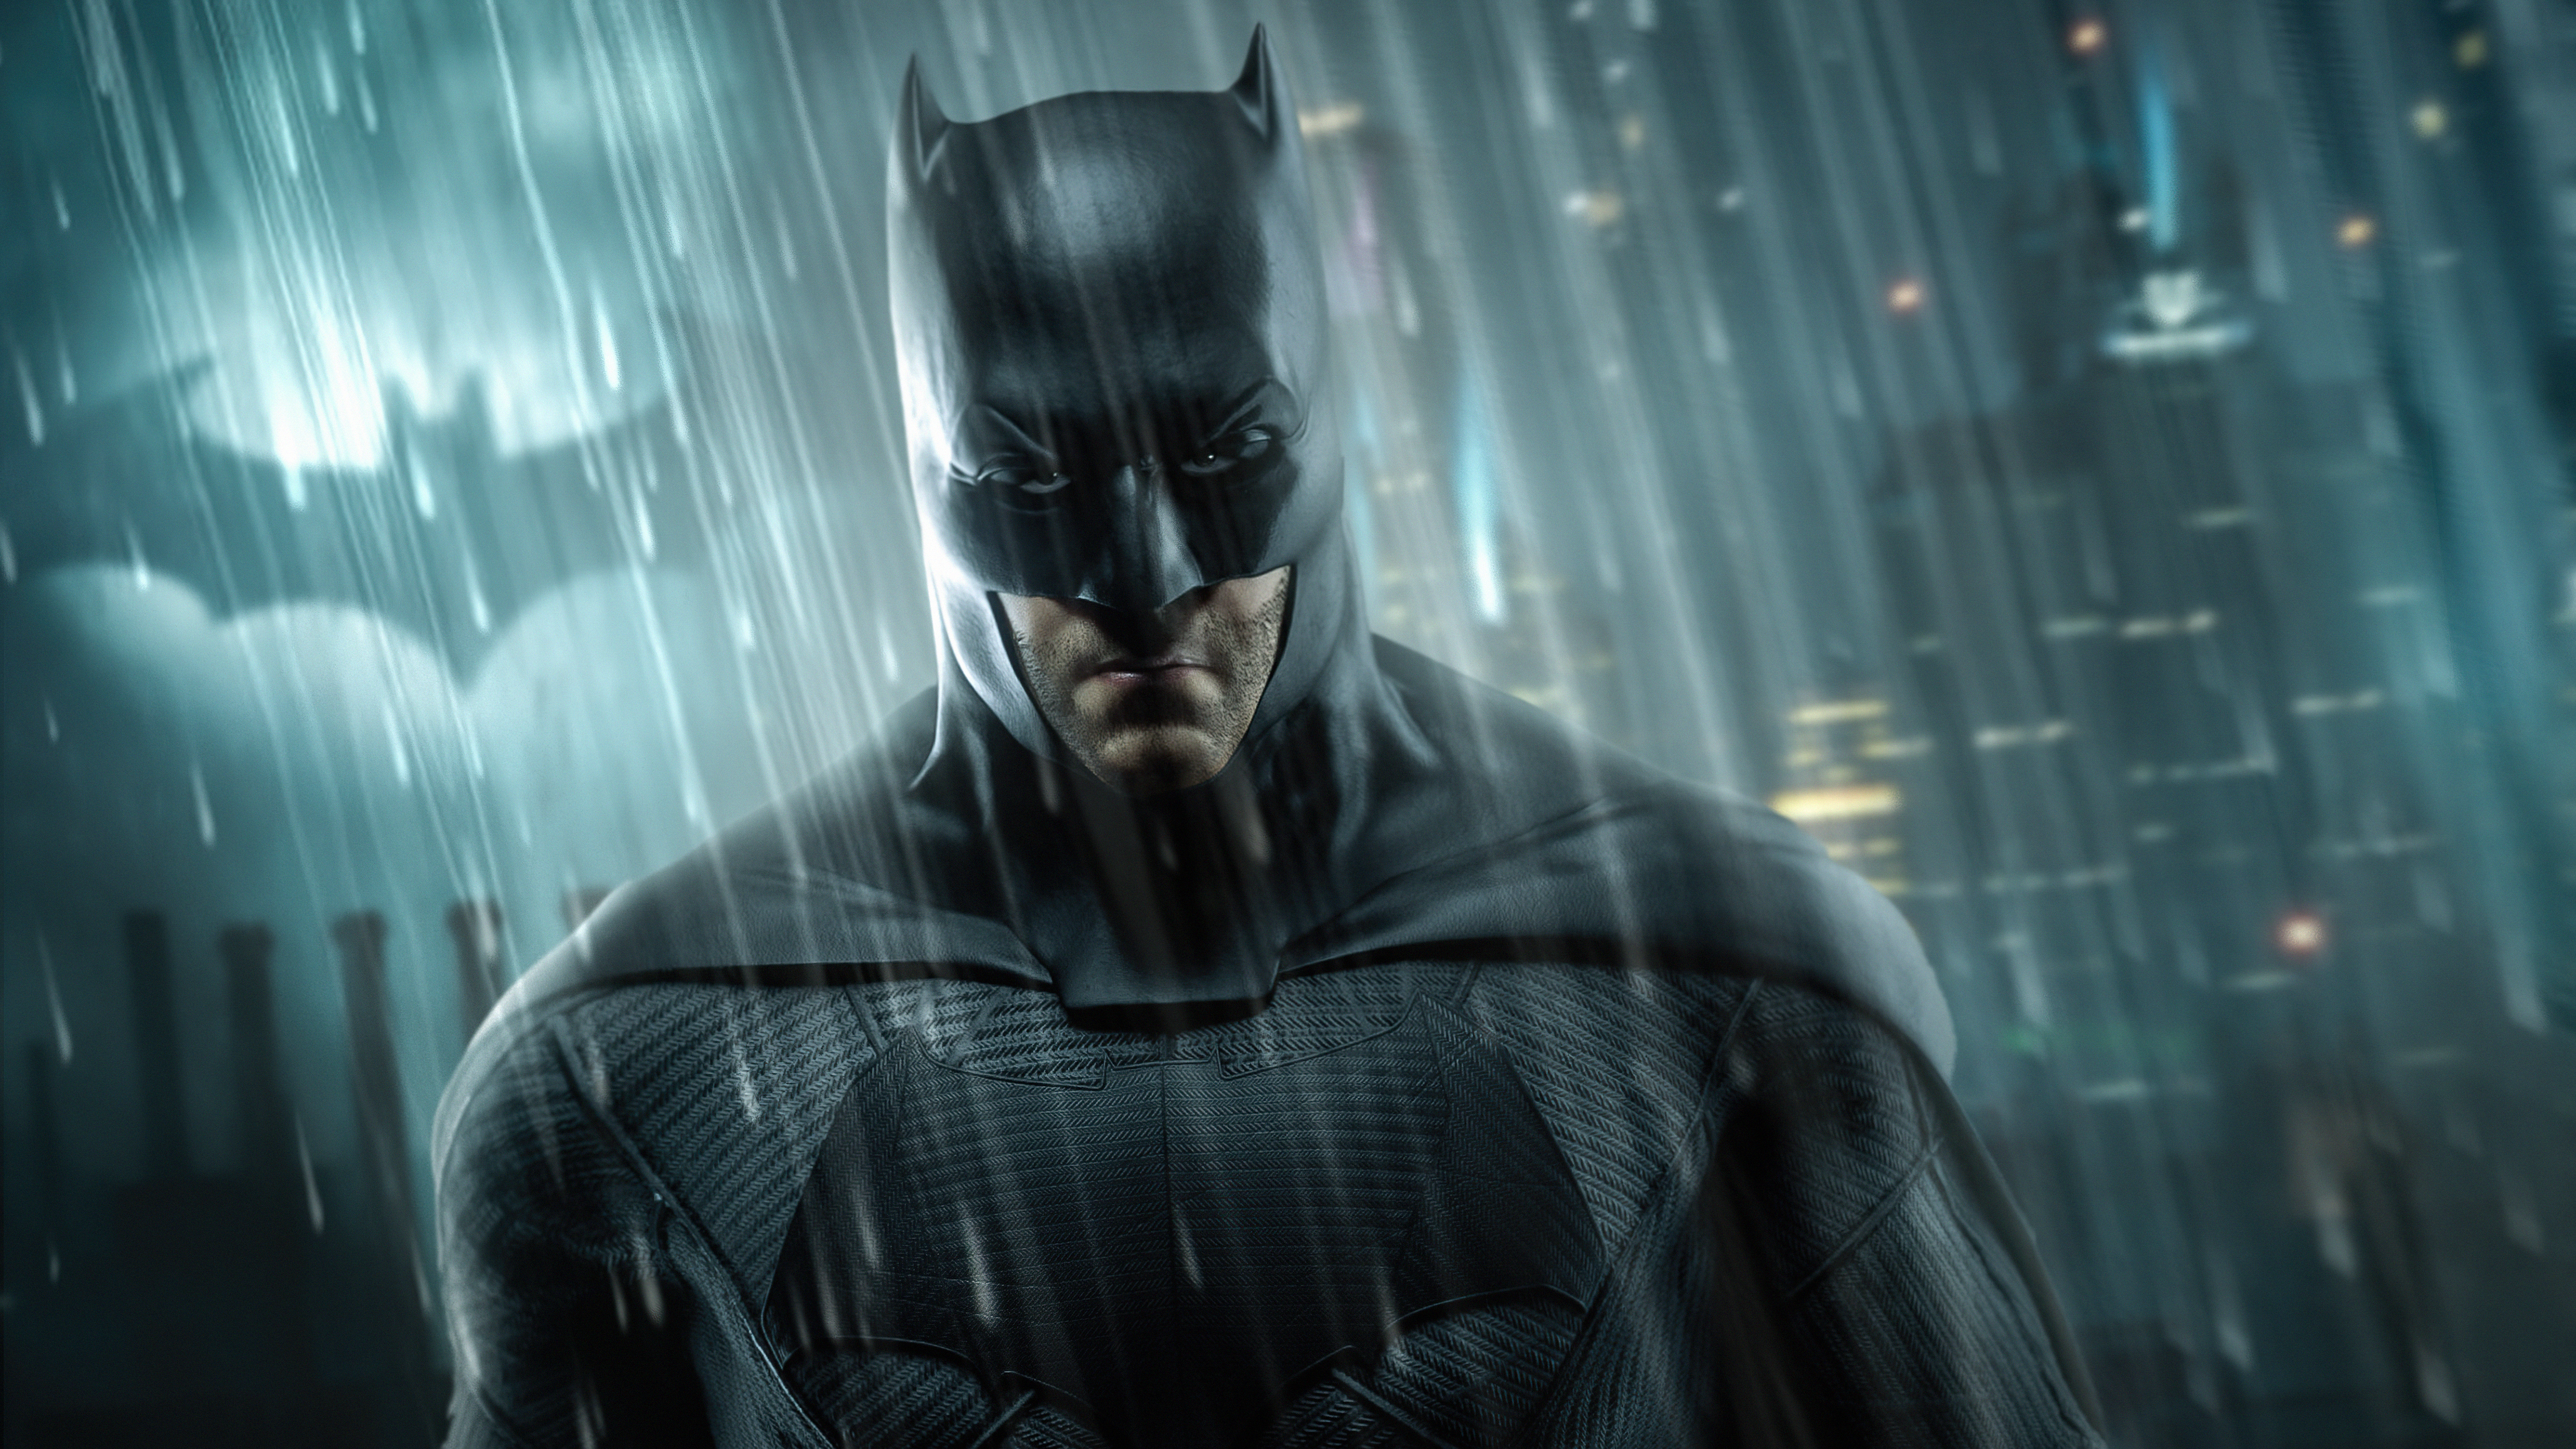 The Batman 4k Digital Movie Cool Wallpaper, HD Movies 4K Wallpapers, Images  and Background - Wallpapers Den